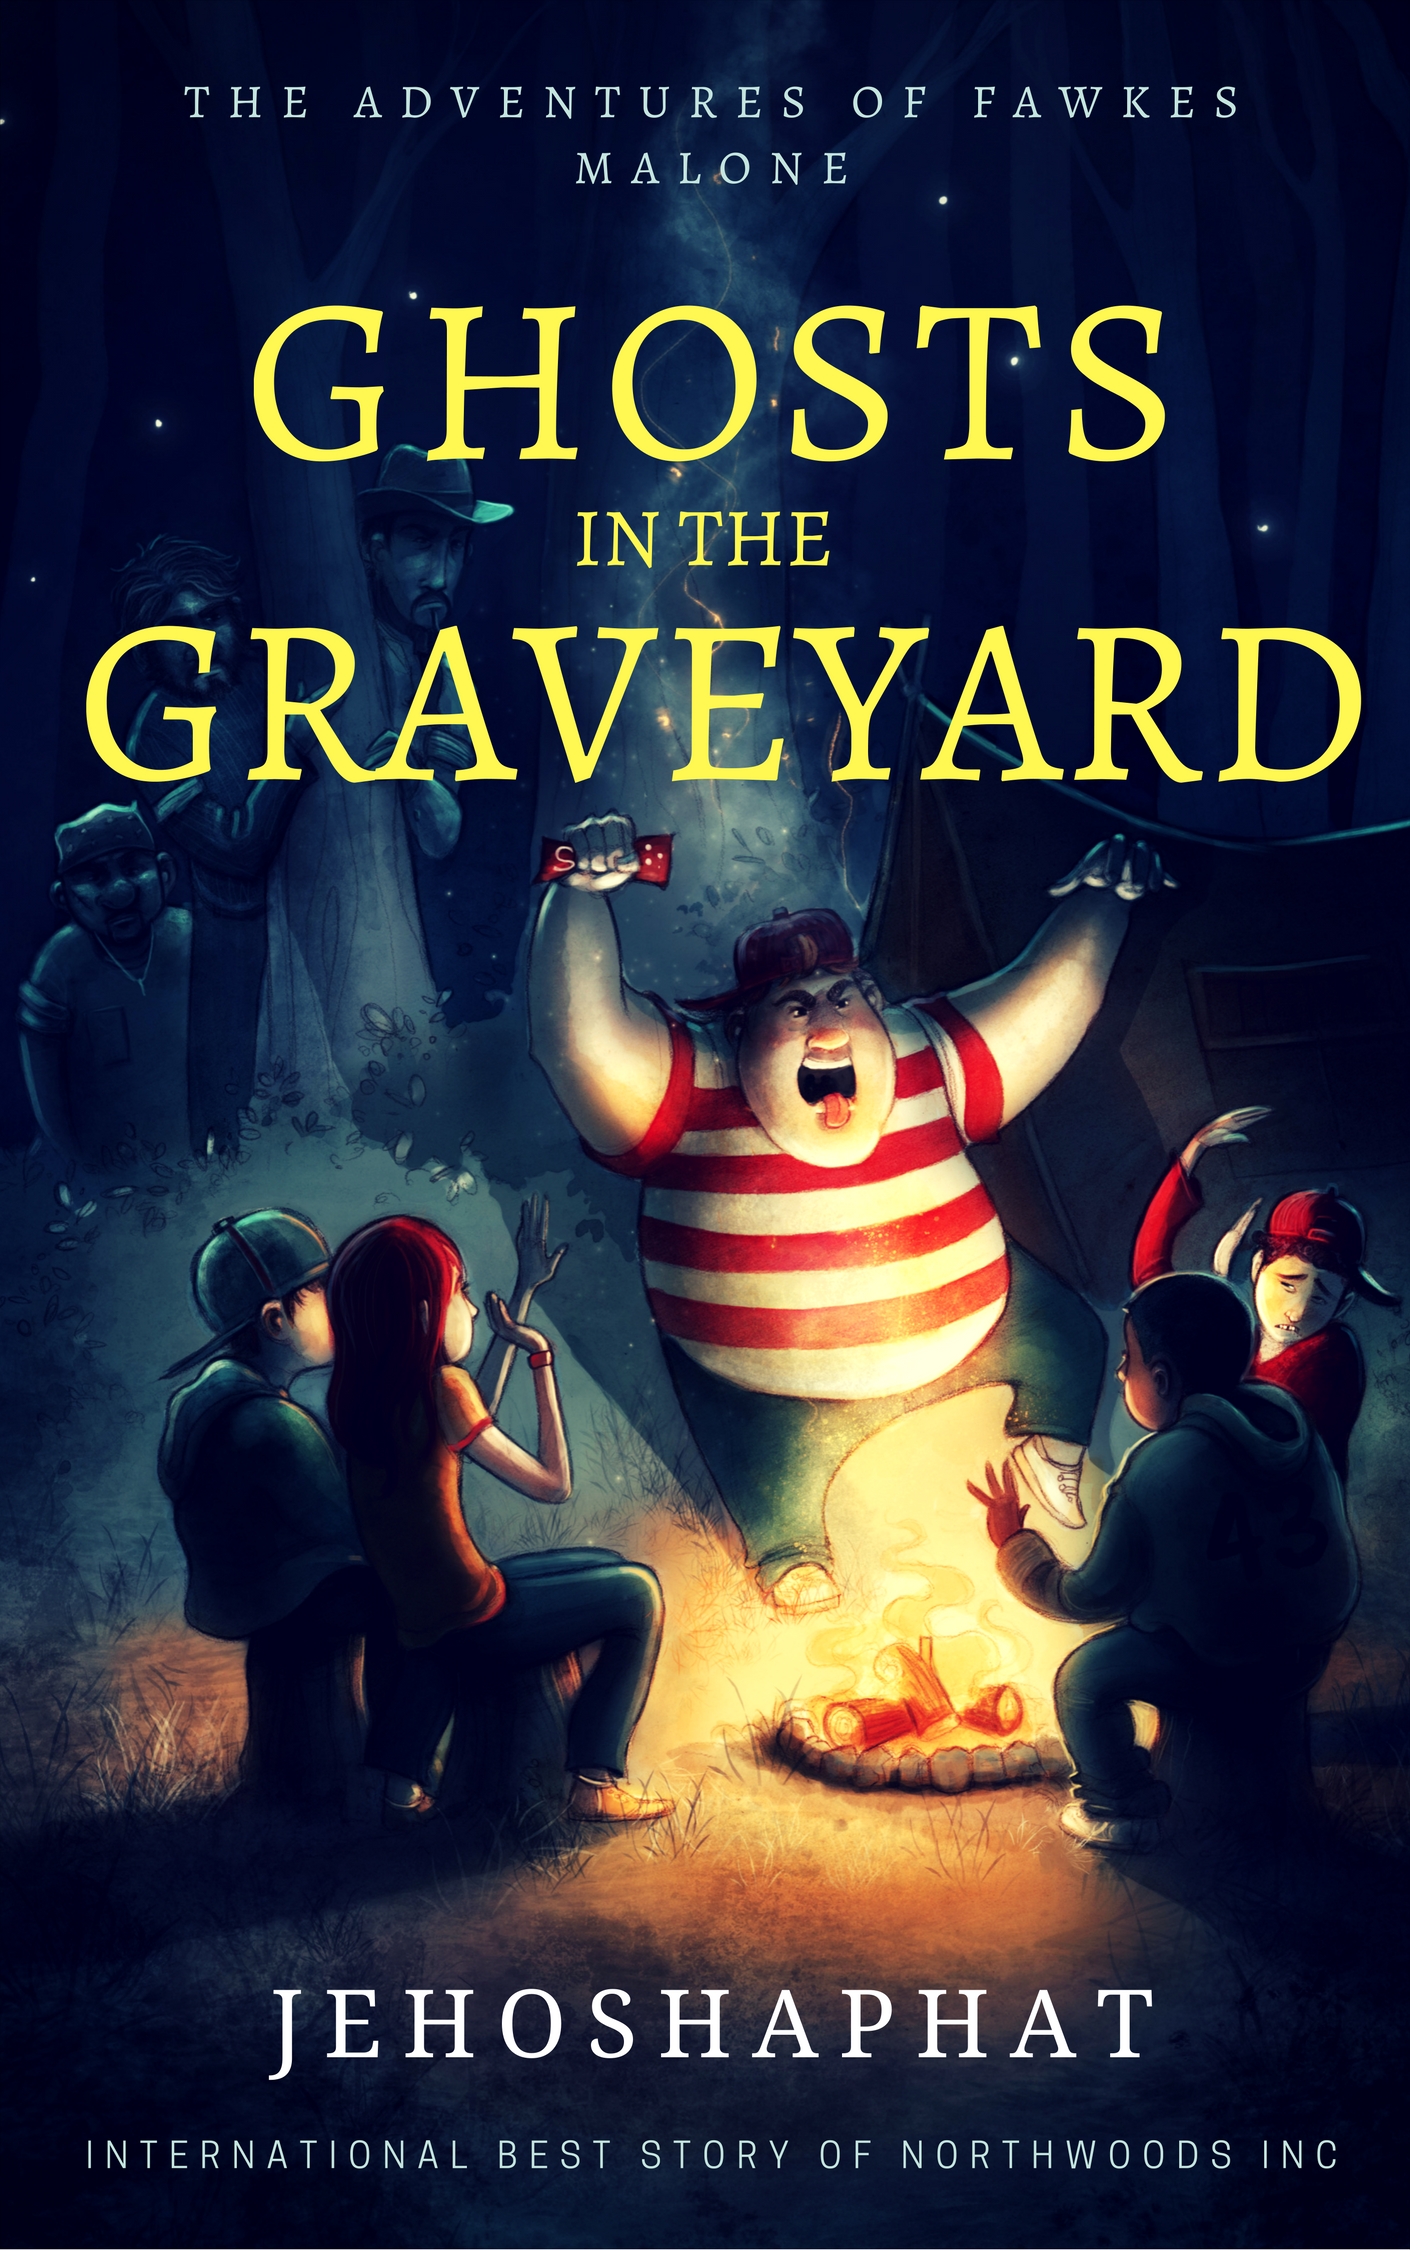 FREE: Ghosts in the Graveyard: The Adventures of Fawkes Malone by Jehoshaphat Shalom